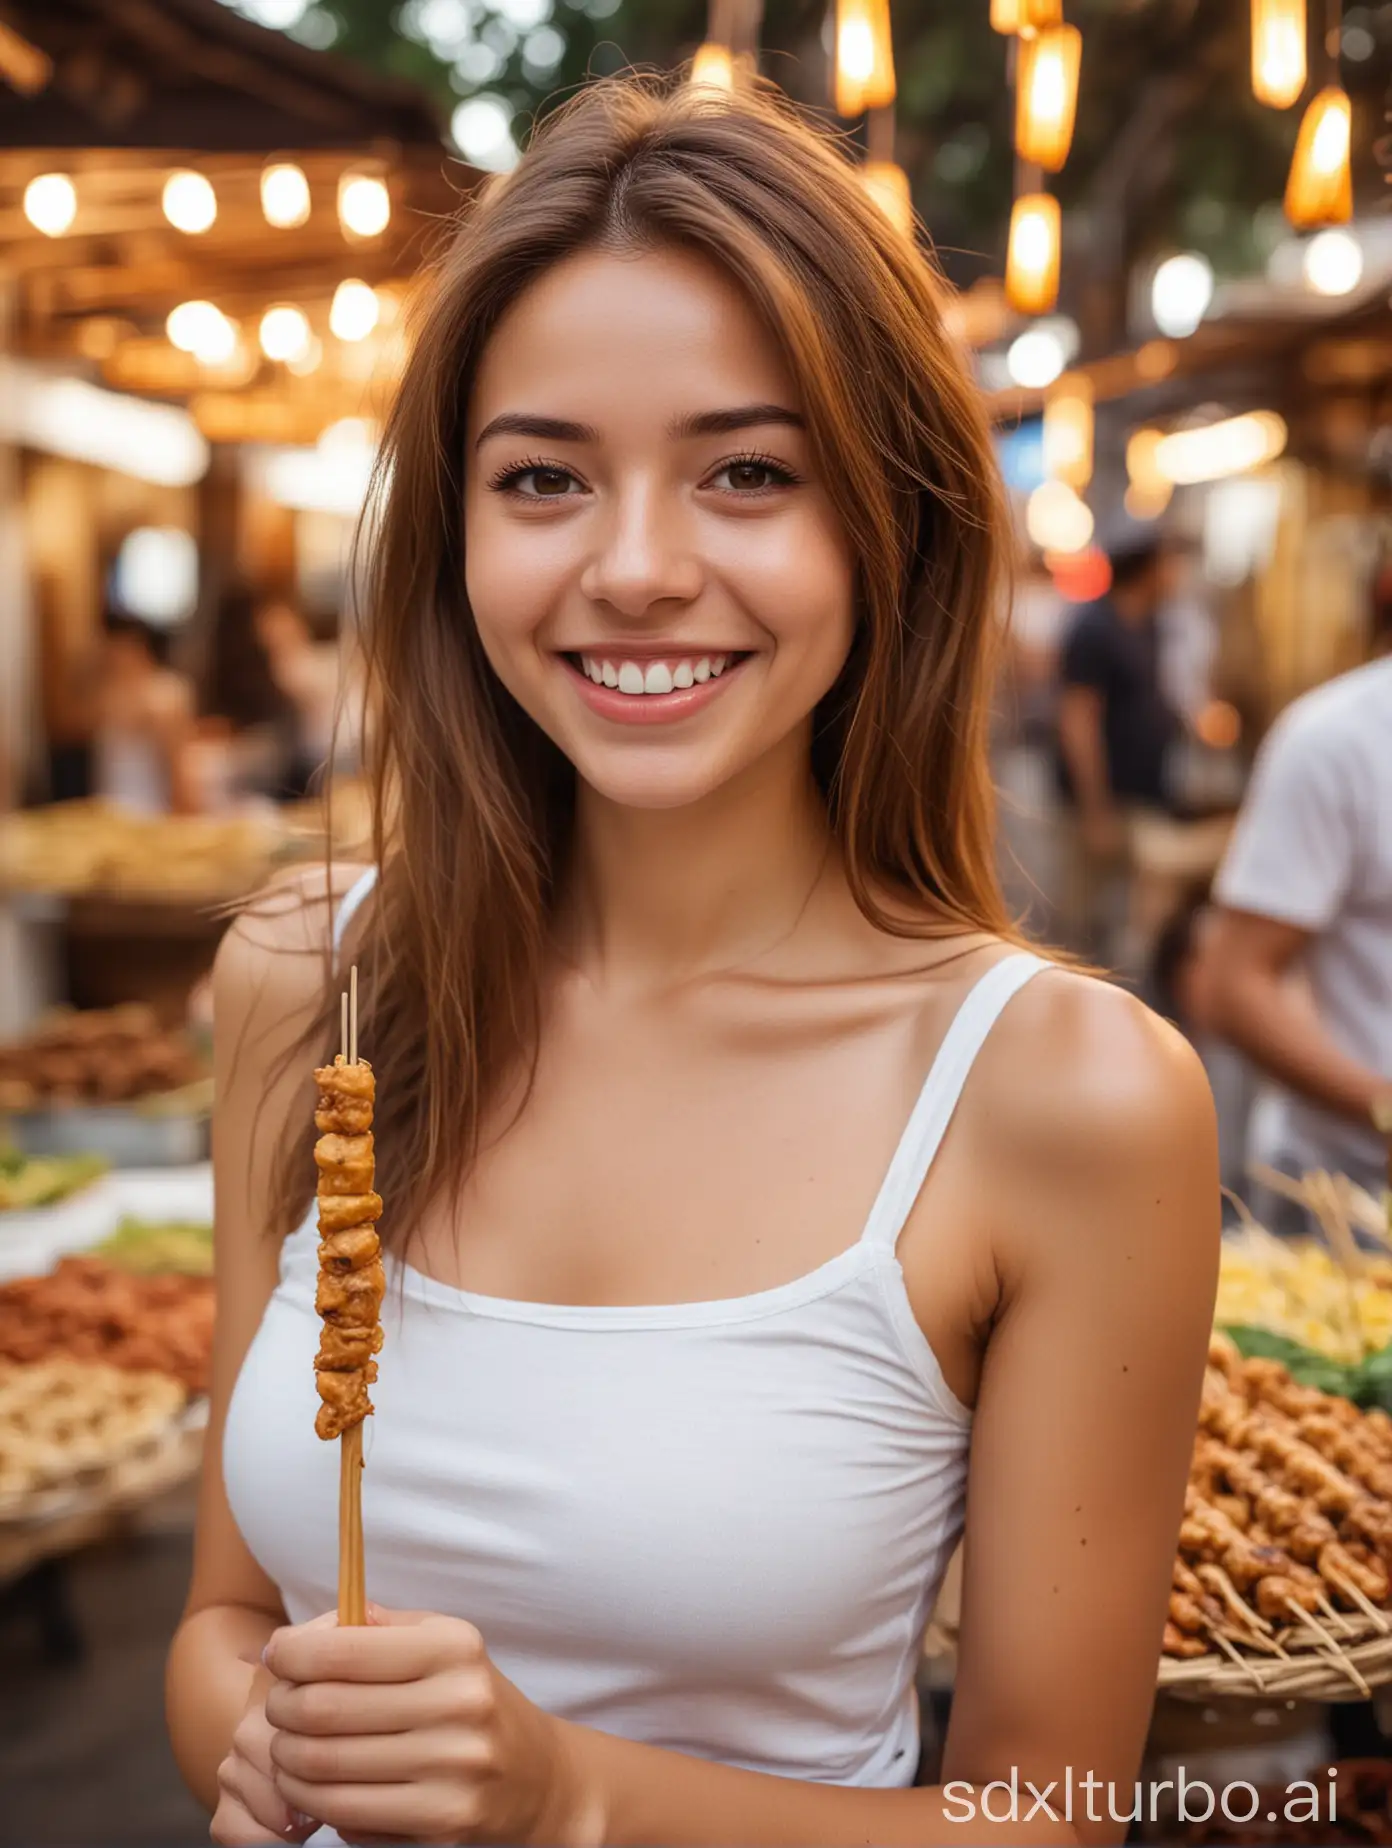 young woman, long brown hair, slim body, small breast, wearing white tank-top, close up, bokeh background, background of a market, cute pose, smiling, holding one satay stick